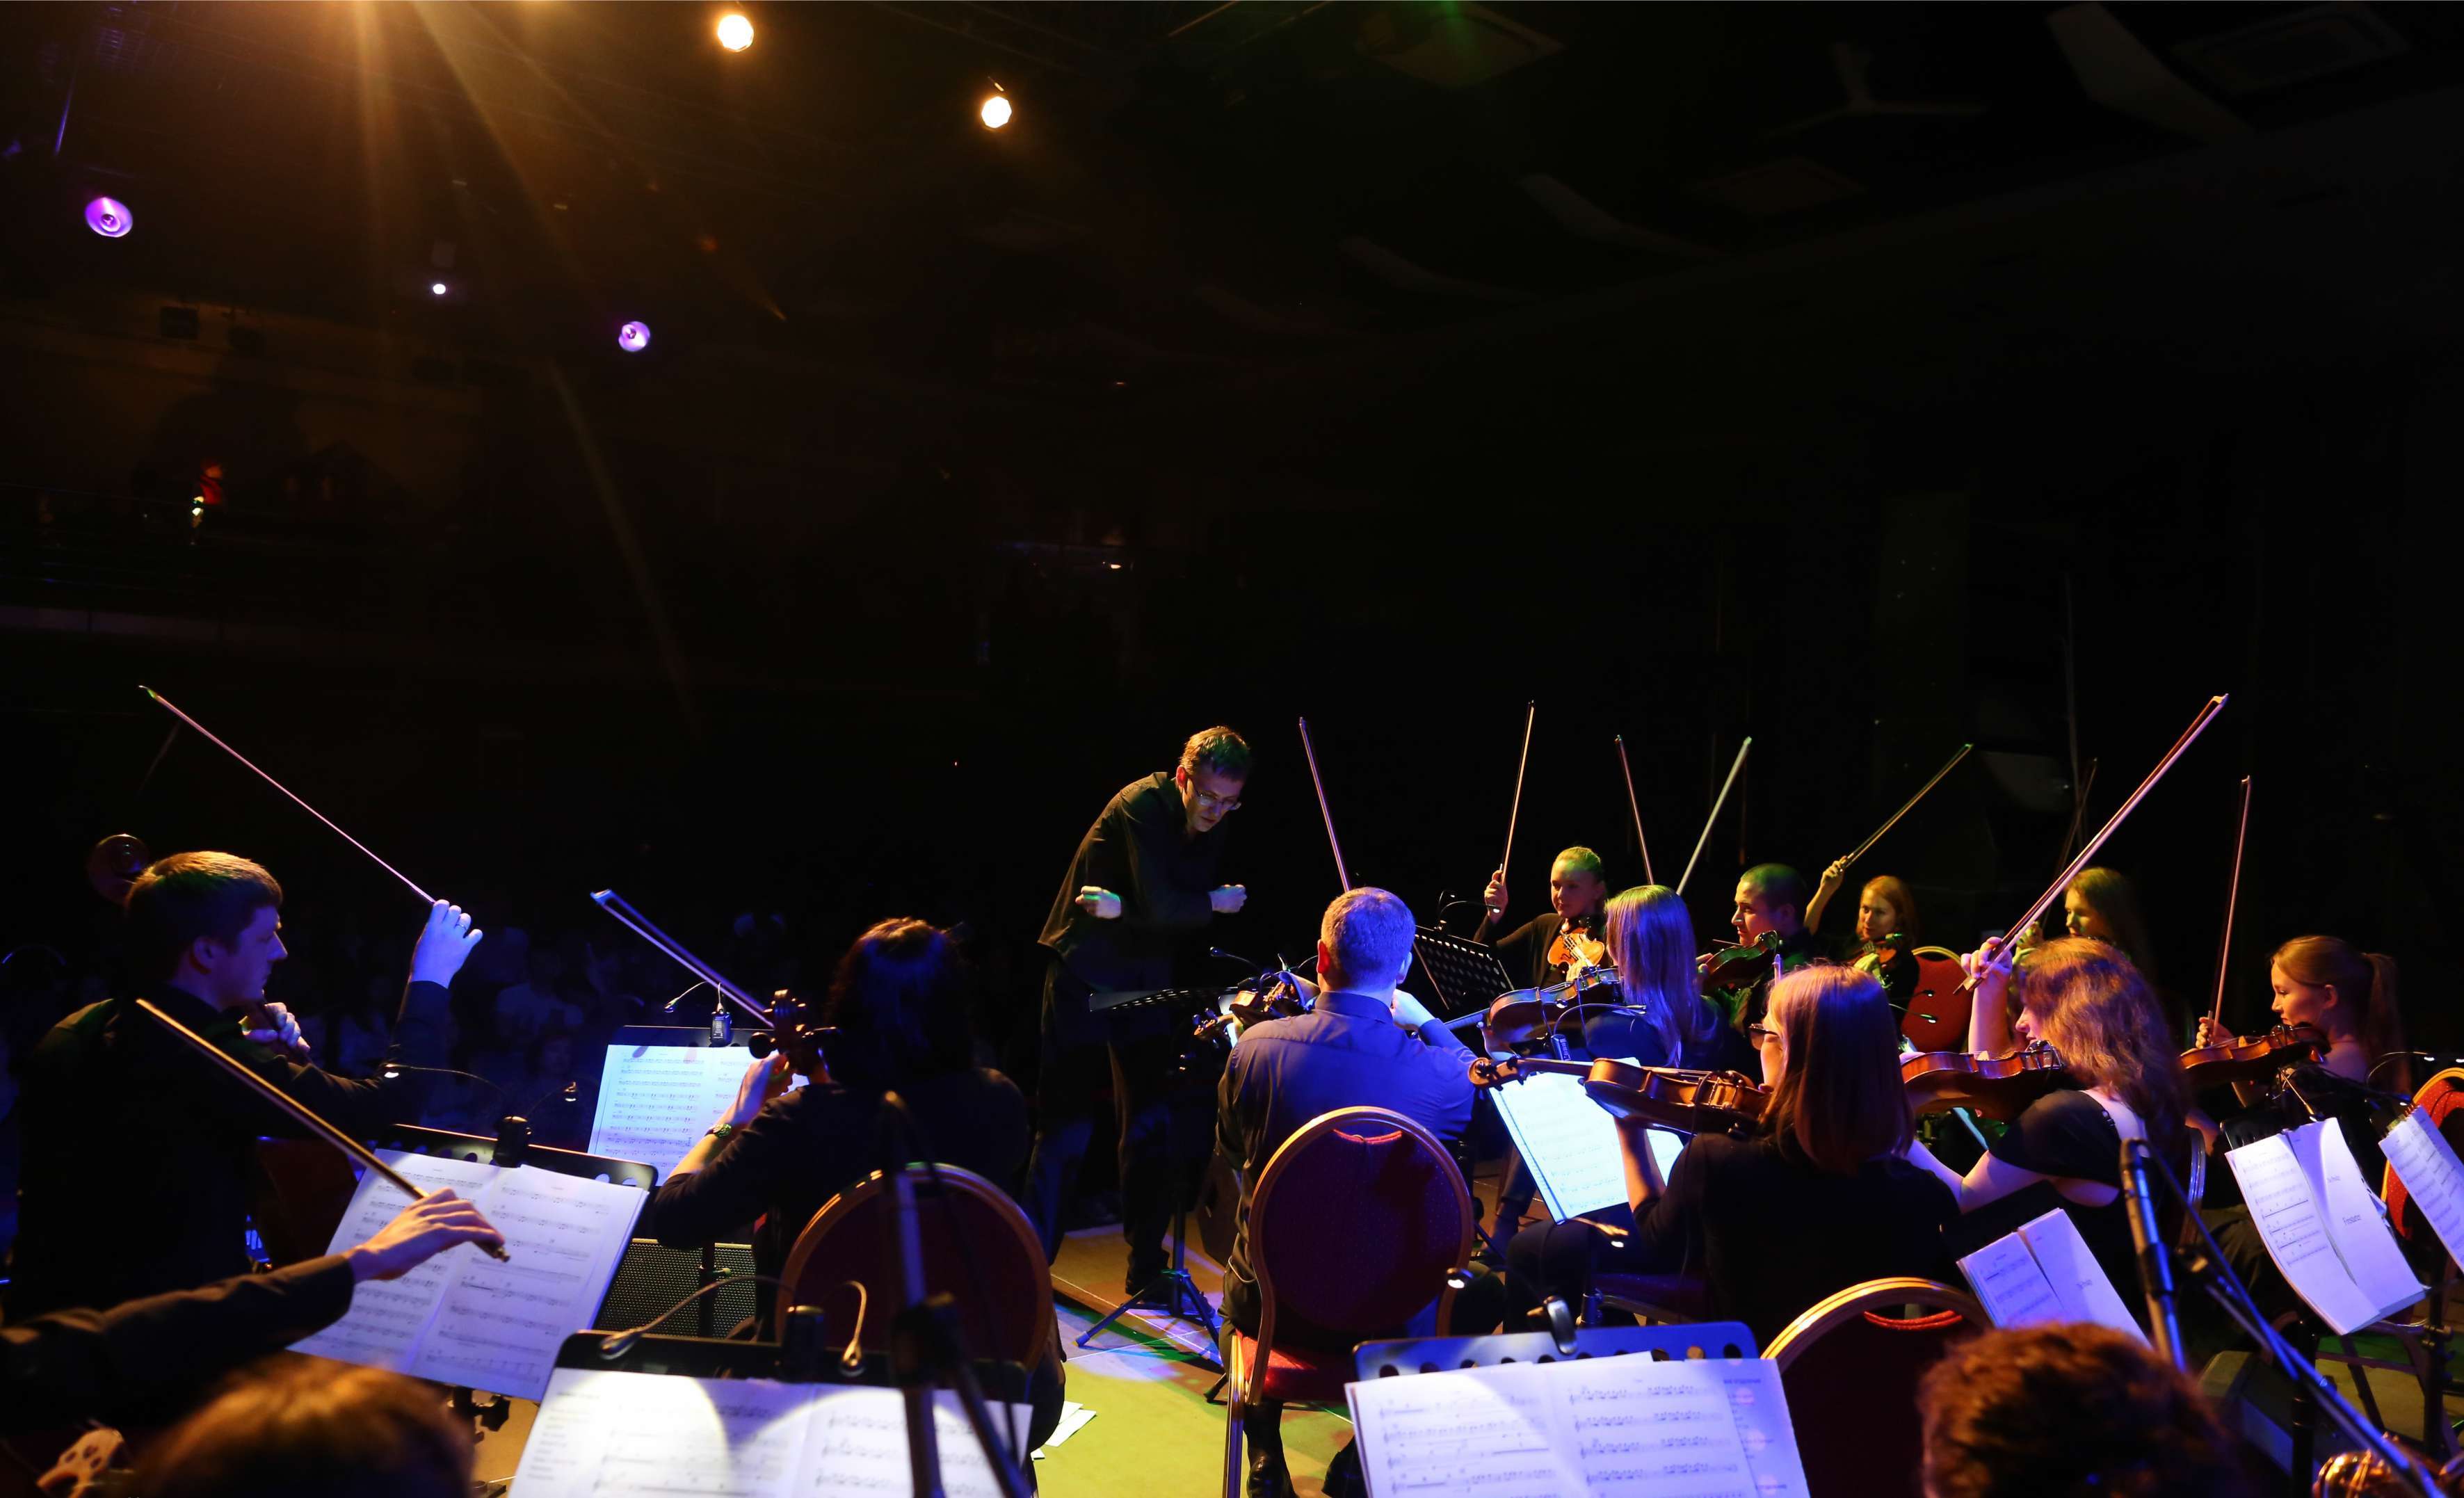 Show orchestra